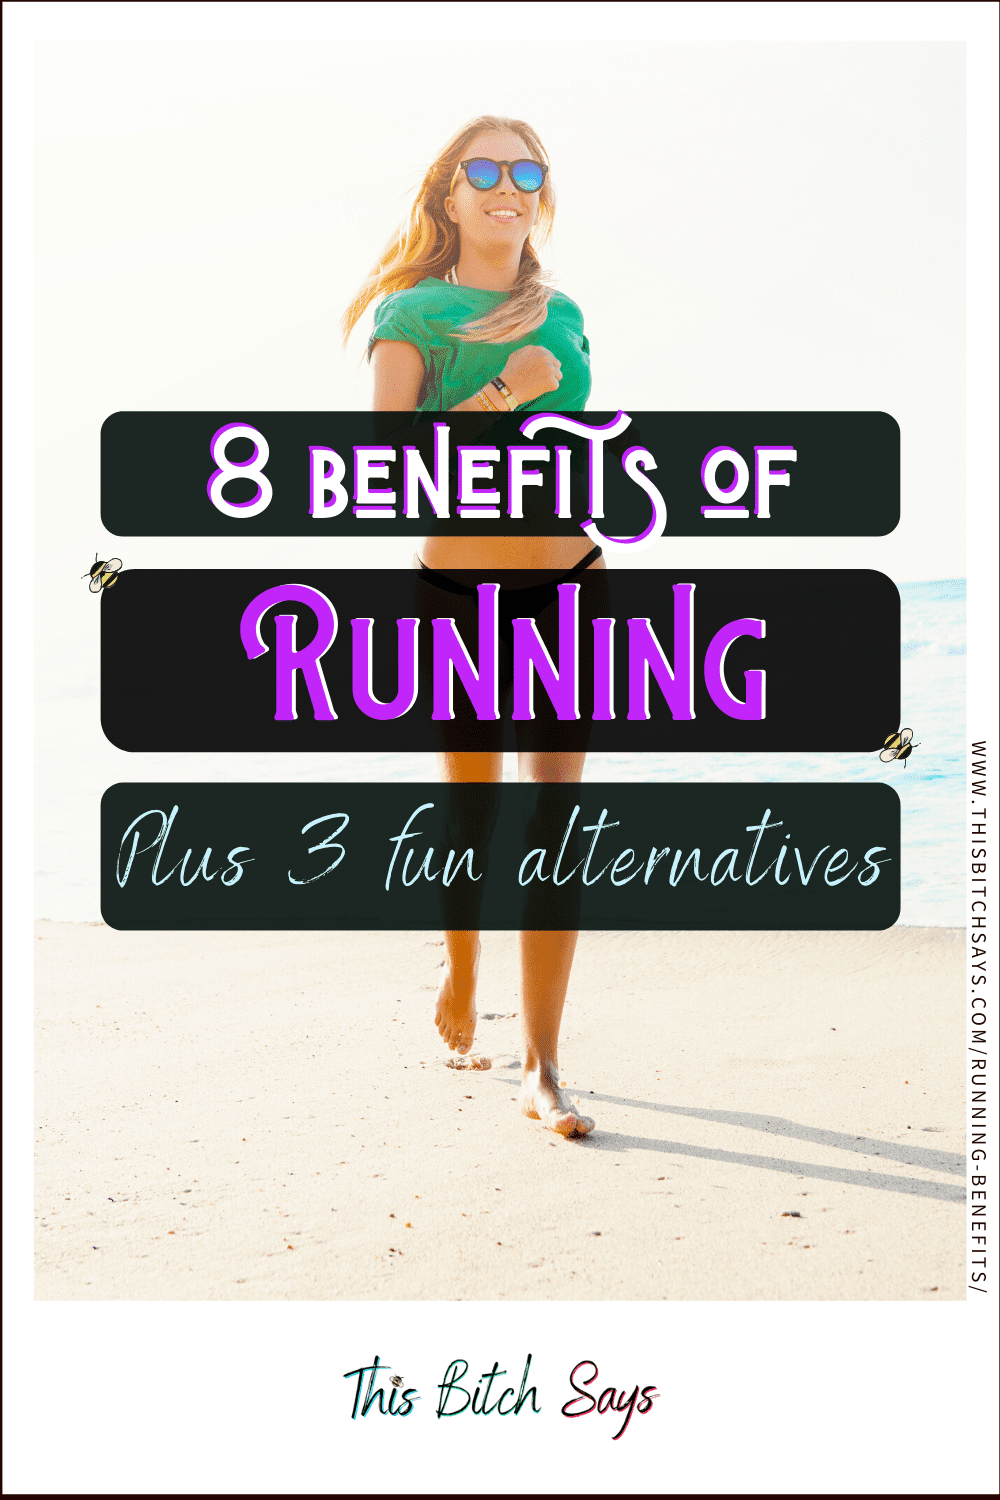 For Your Fitness: 8 benefits of running plus 3 fun alternatives